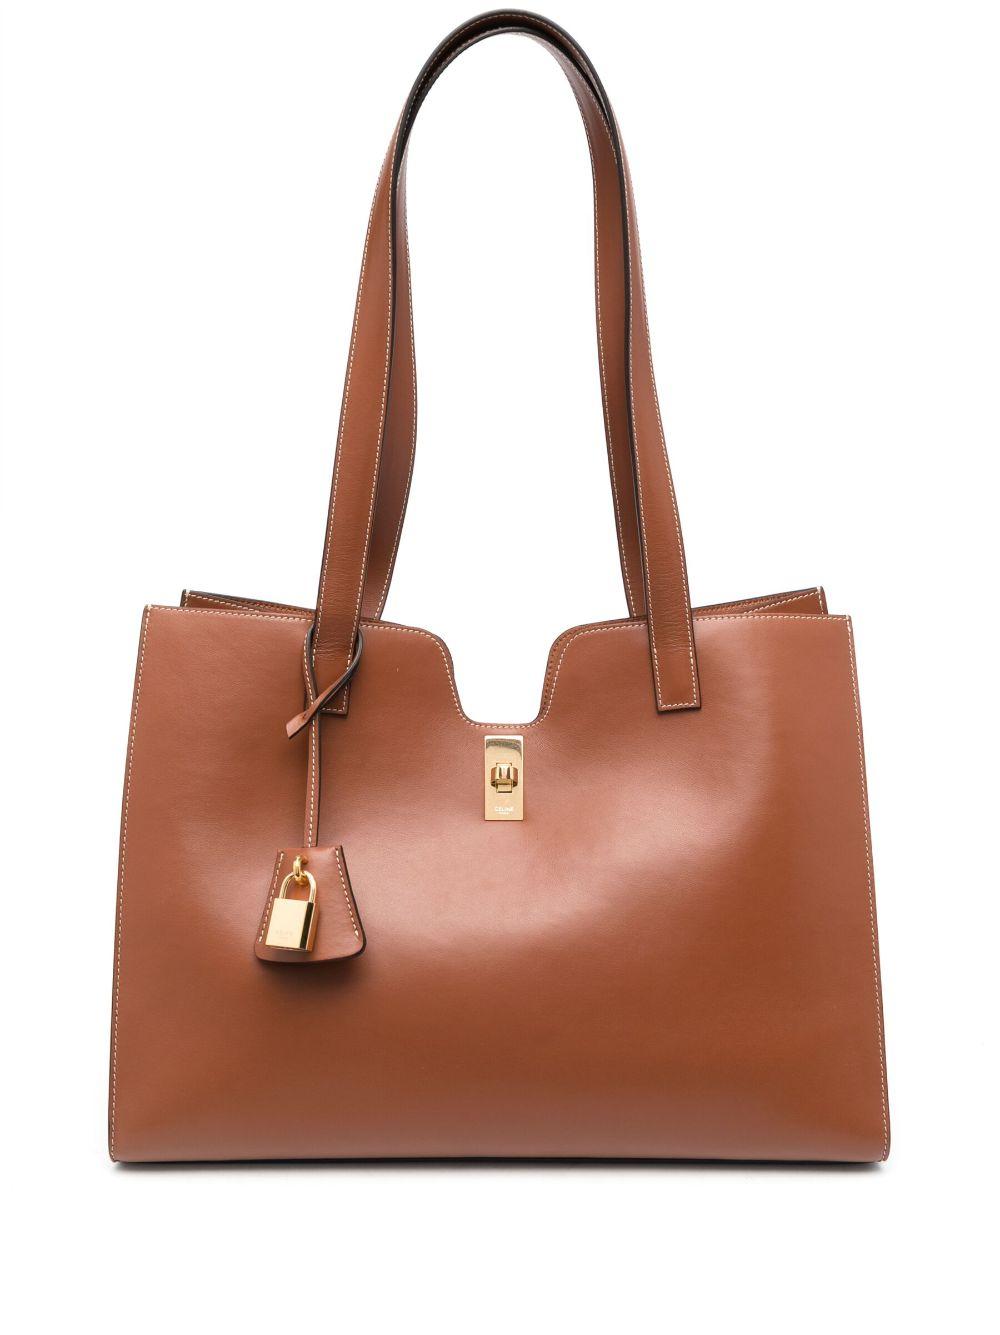 Celine Cabas 16 Leather Tote Bag in Brown | Lyst